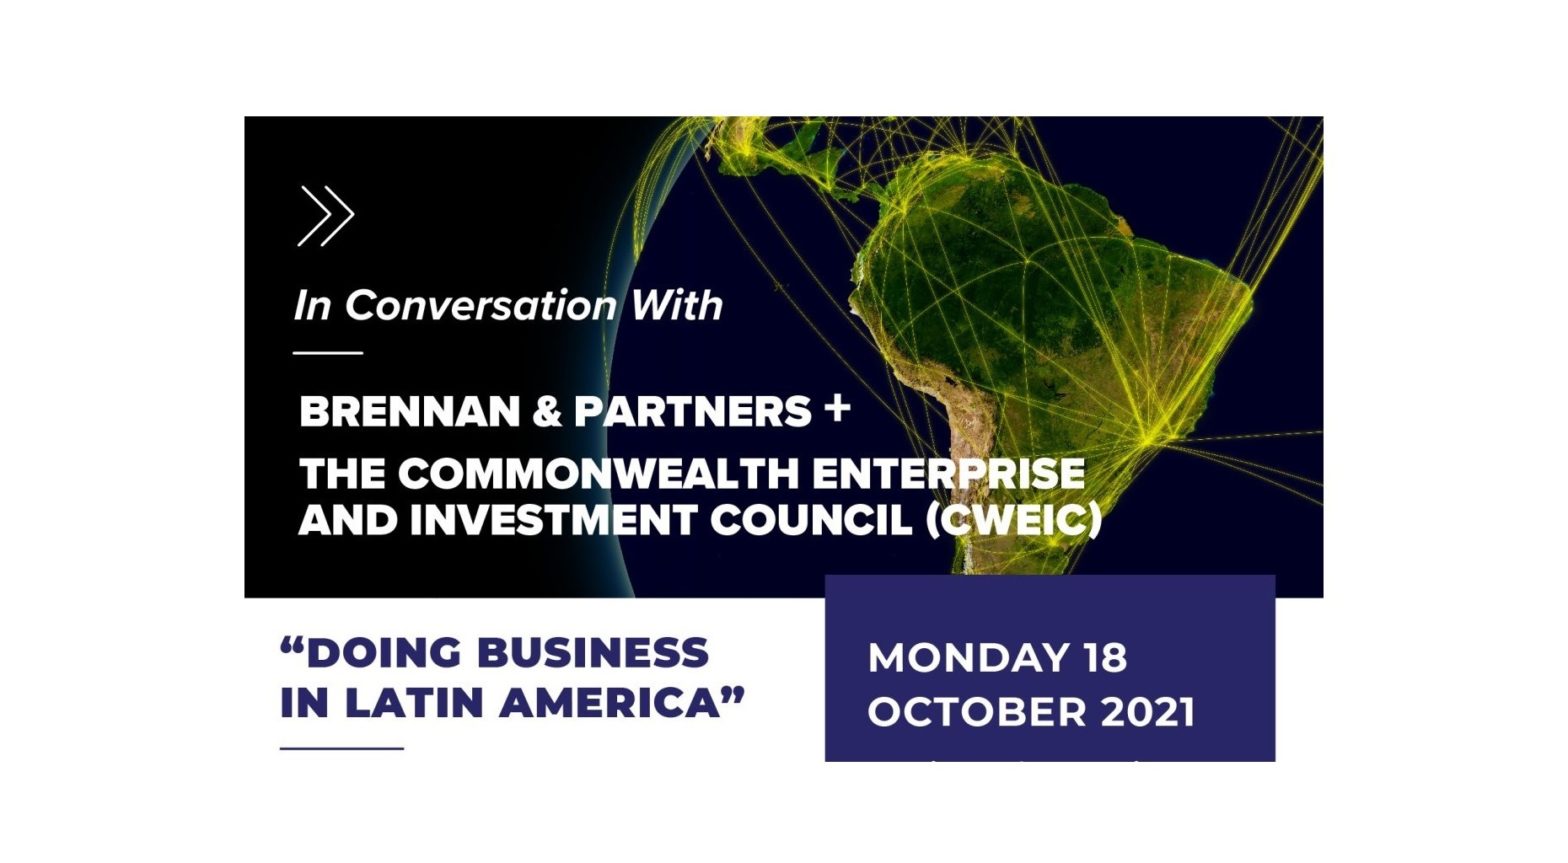 Doing Business in Latin America – In Partnership with Brennan & Partners